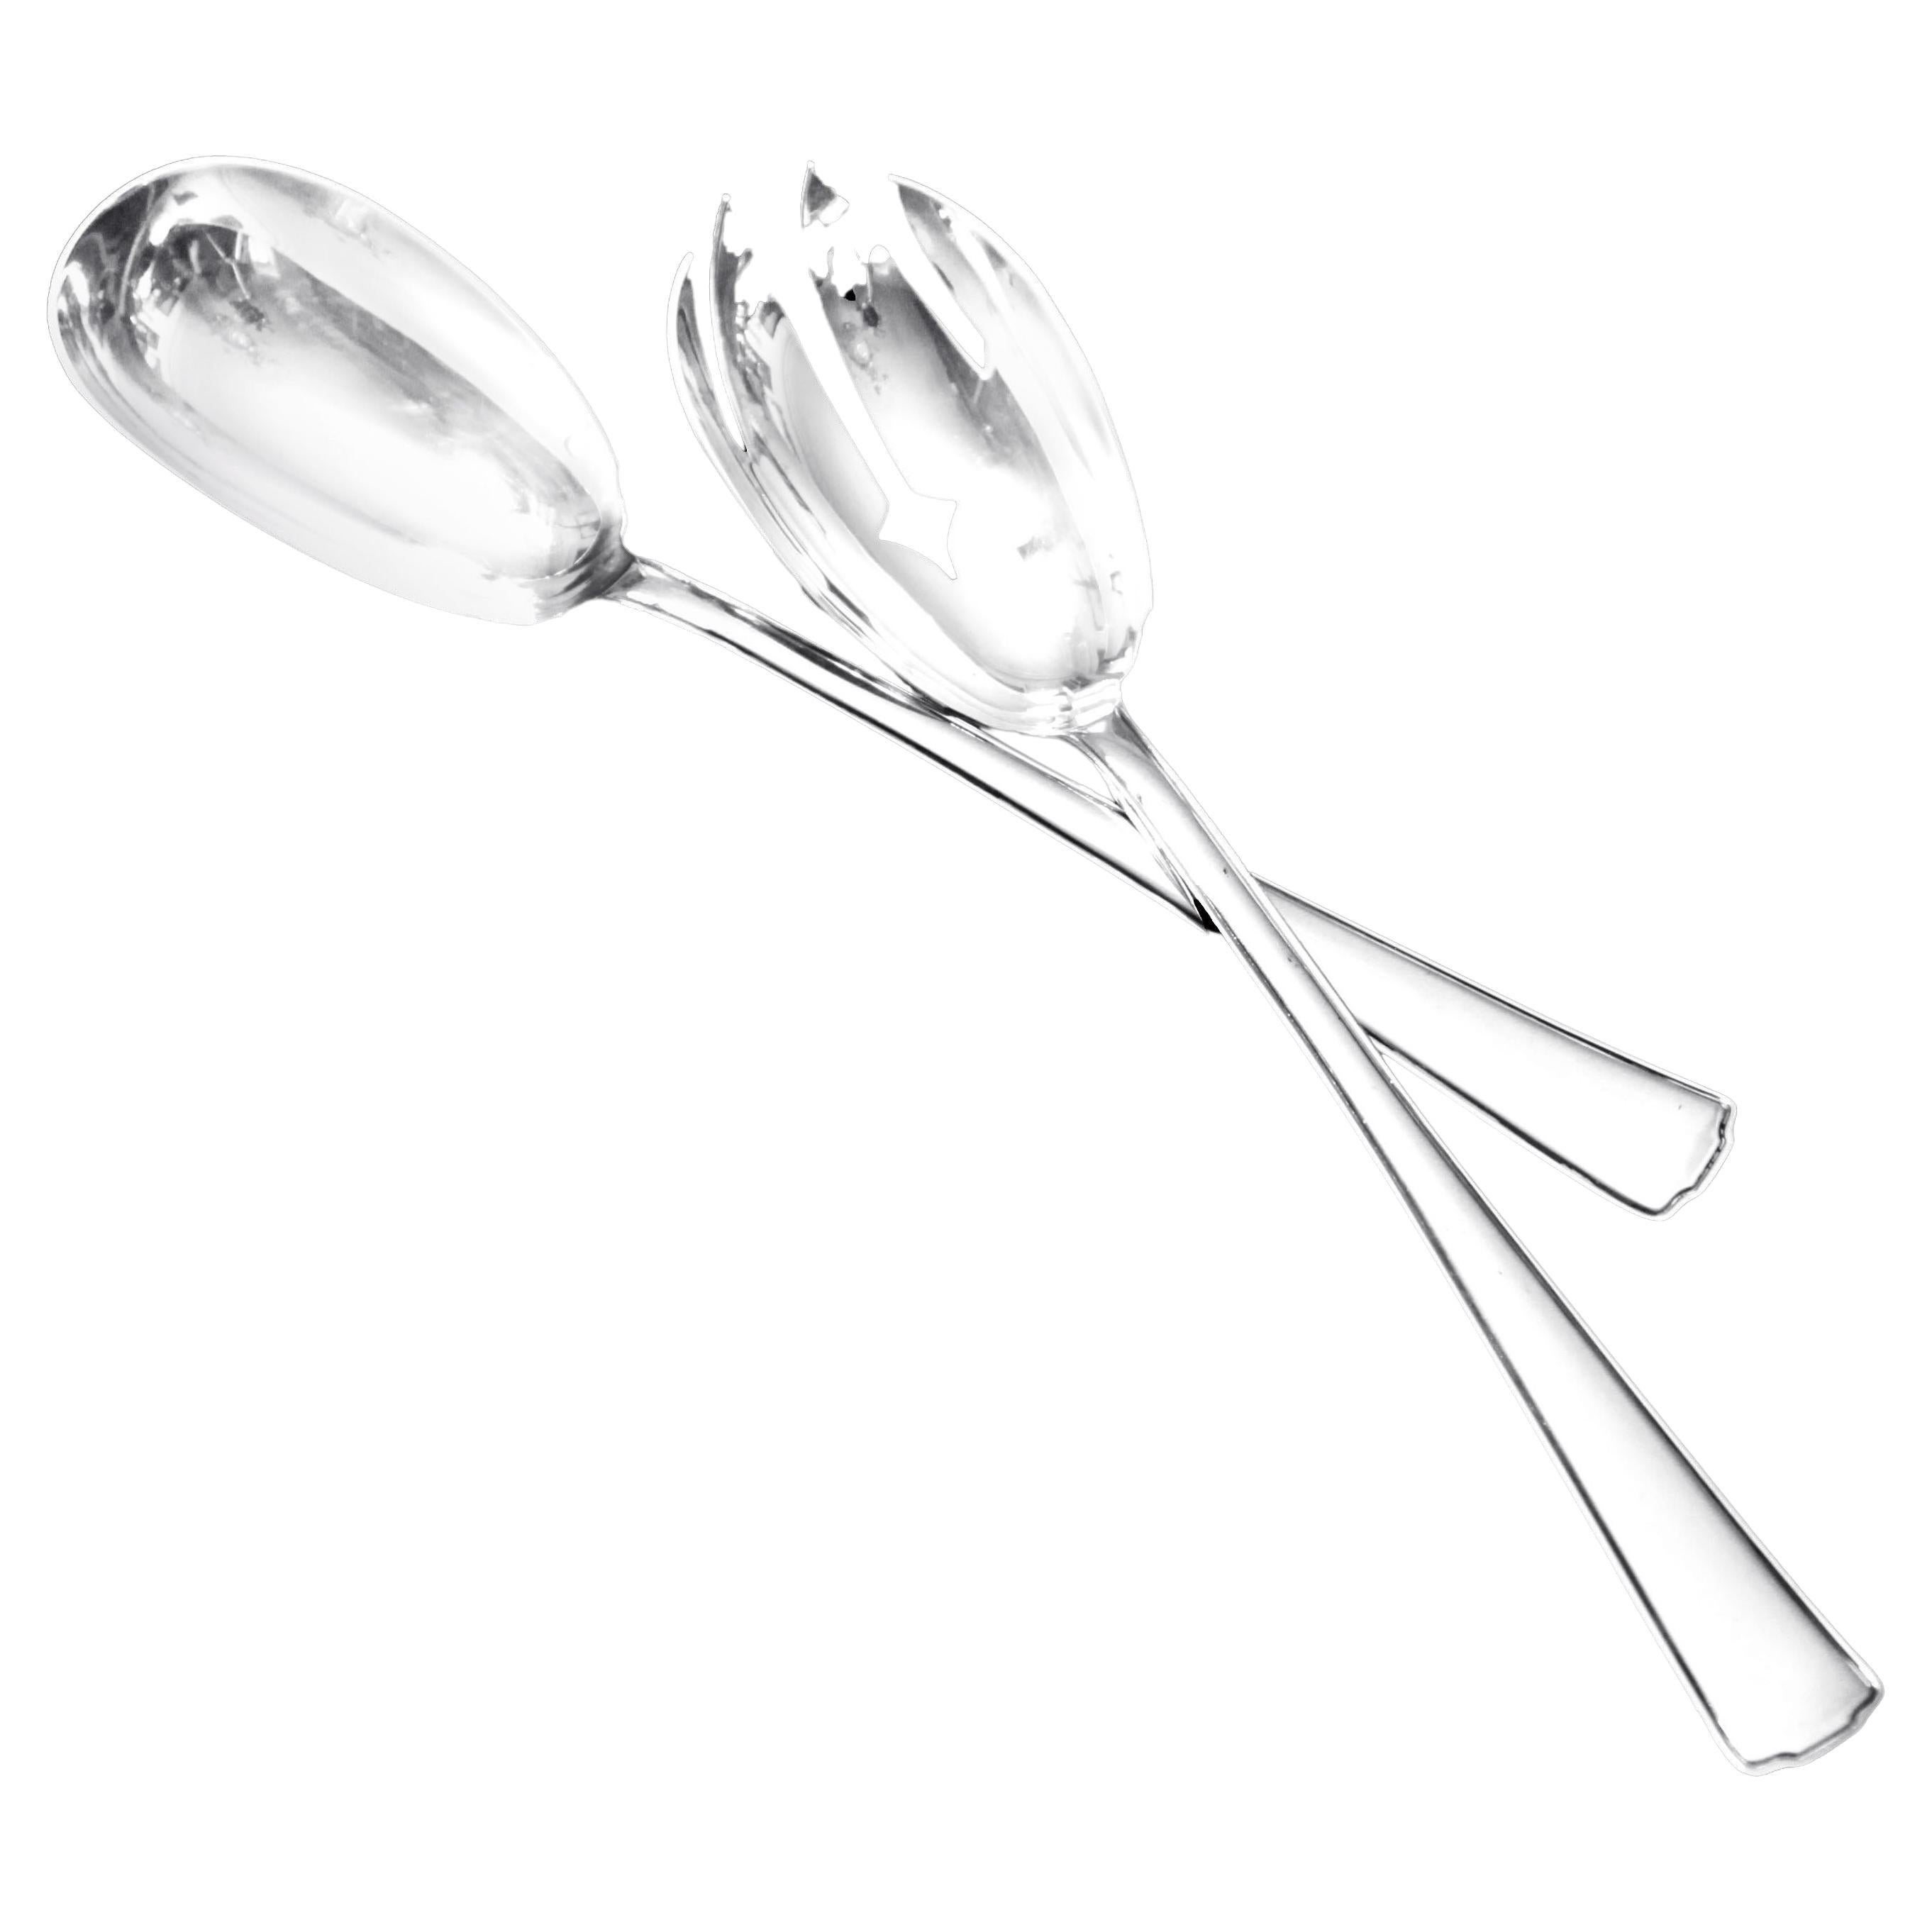 Ravinet Denfert - 17pc. Art Deco French 950 Sterling Silver Serving Pieces, MINT For Sale